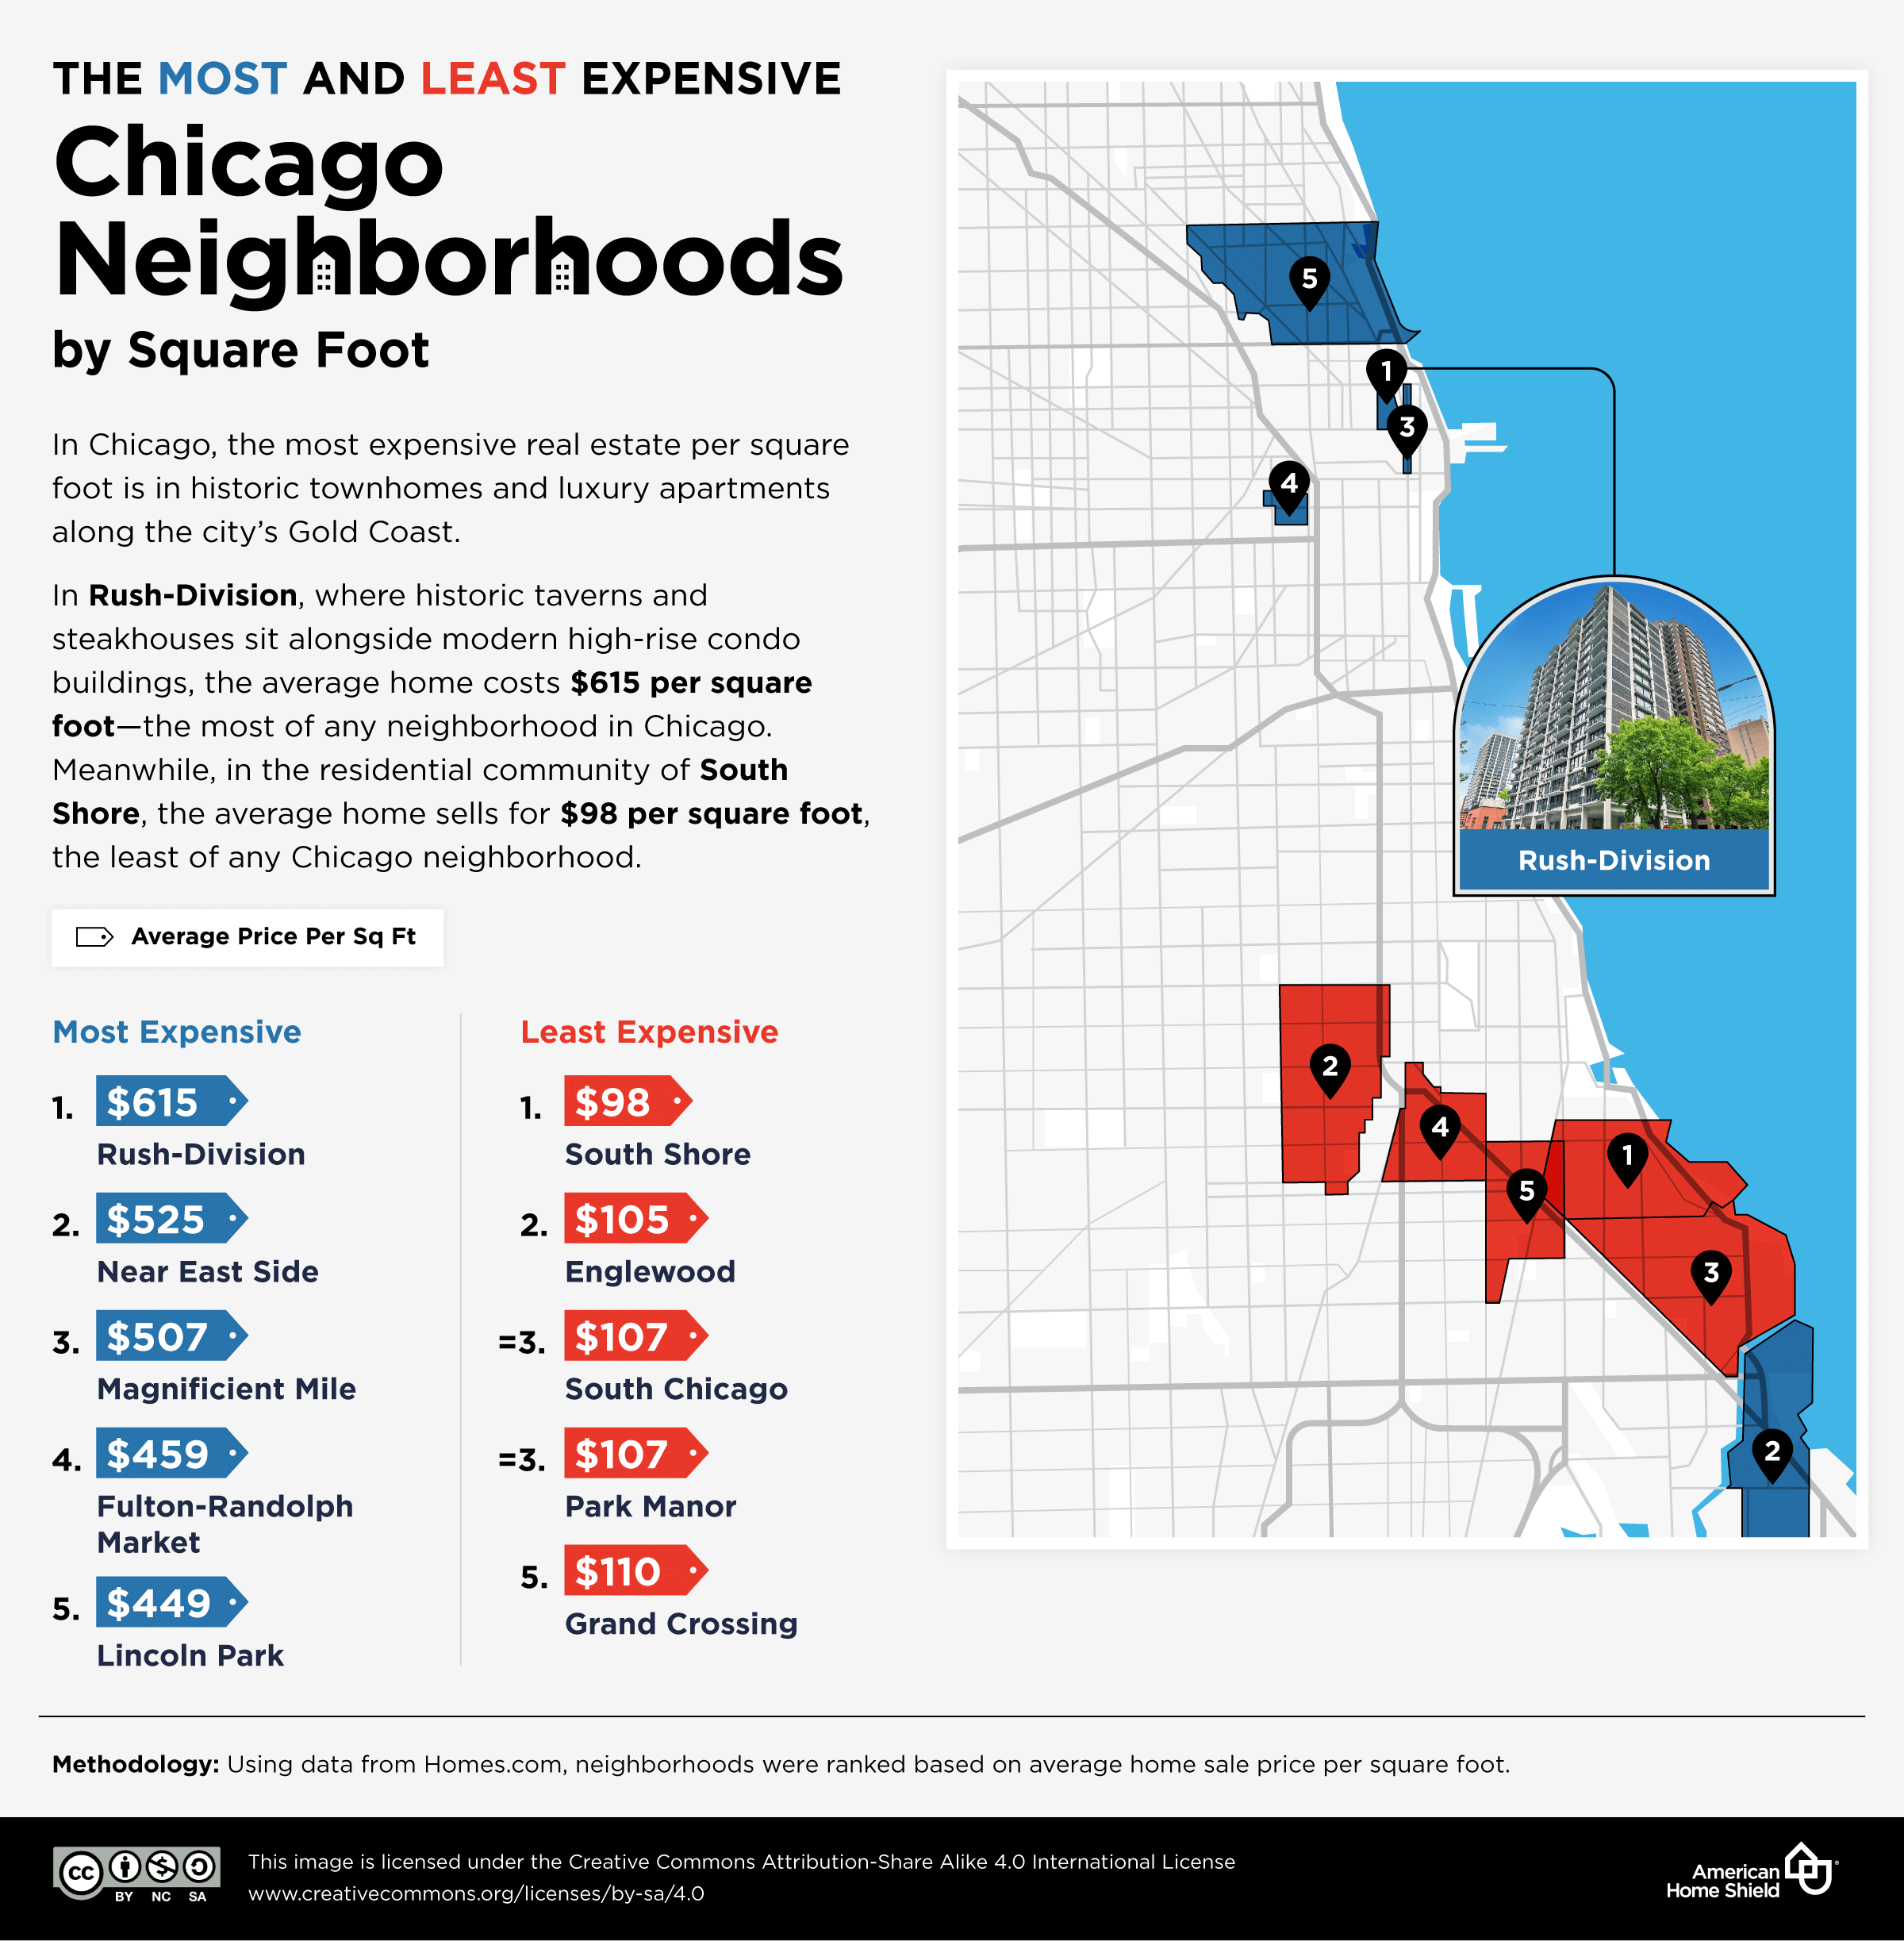 Most-least expensive Chicago neighborhoods per sq ft.